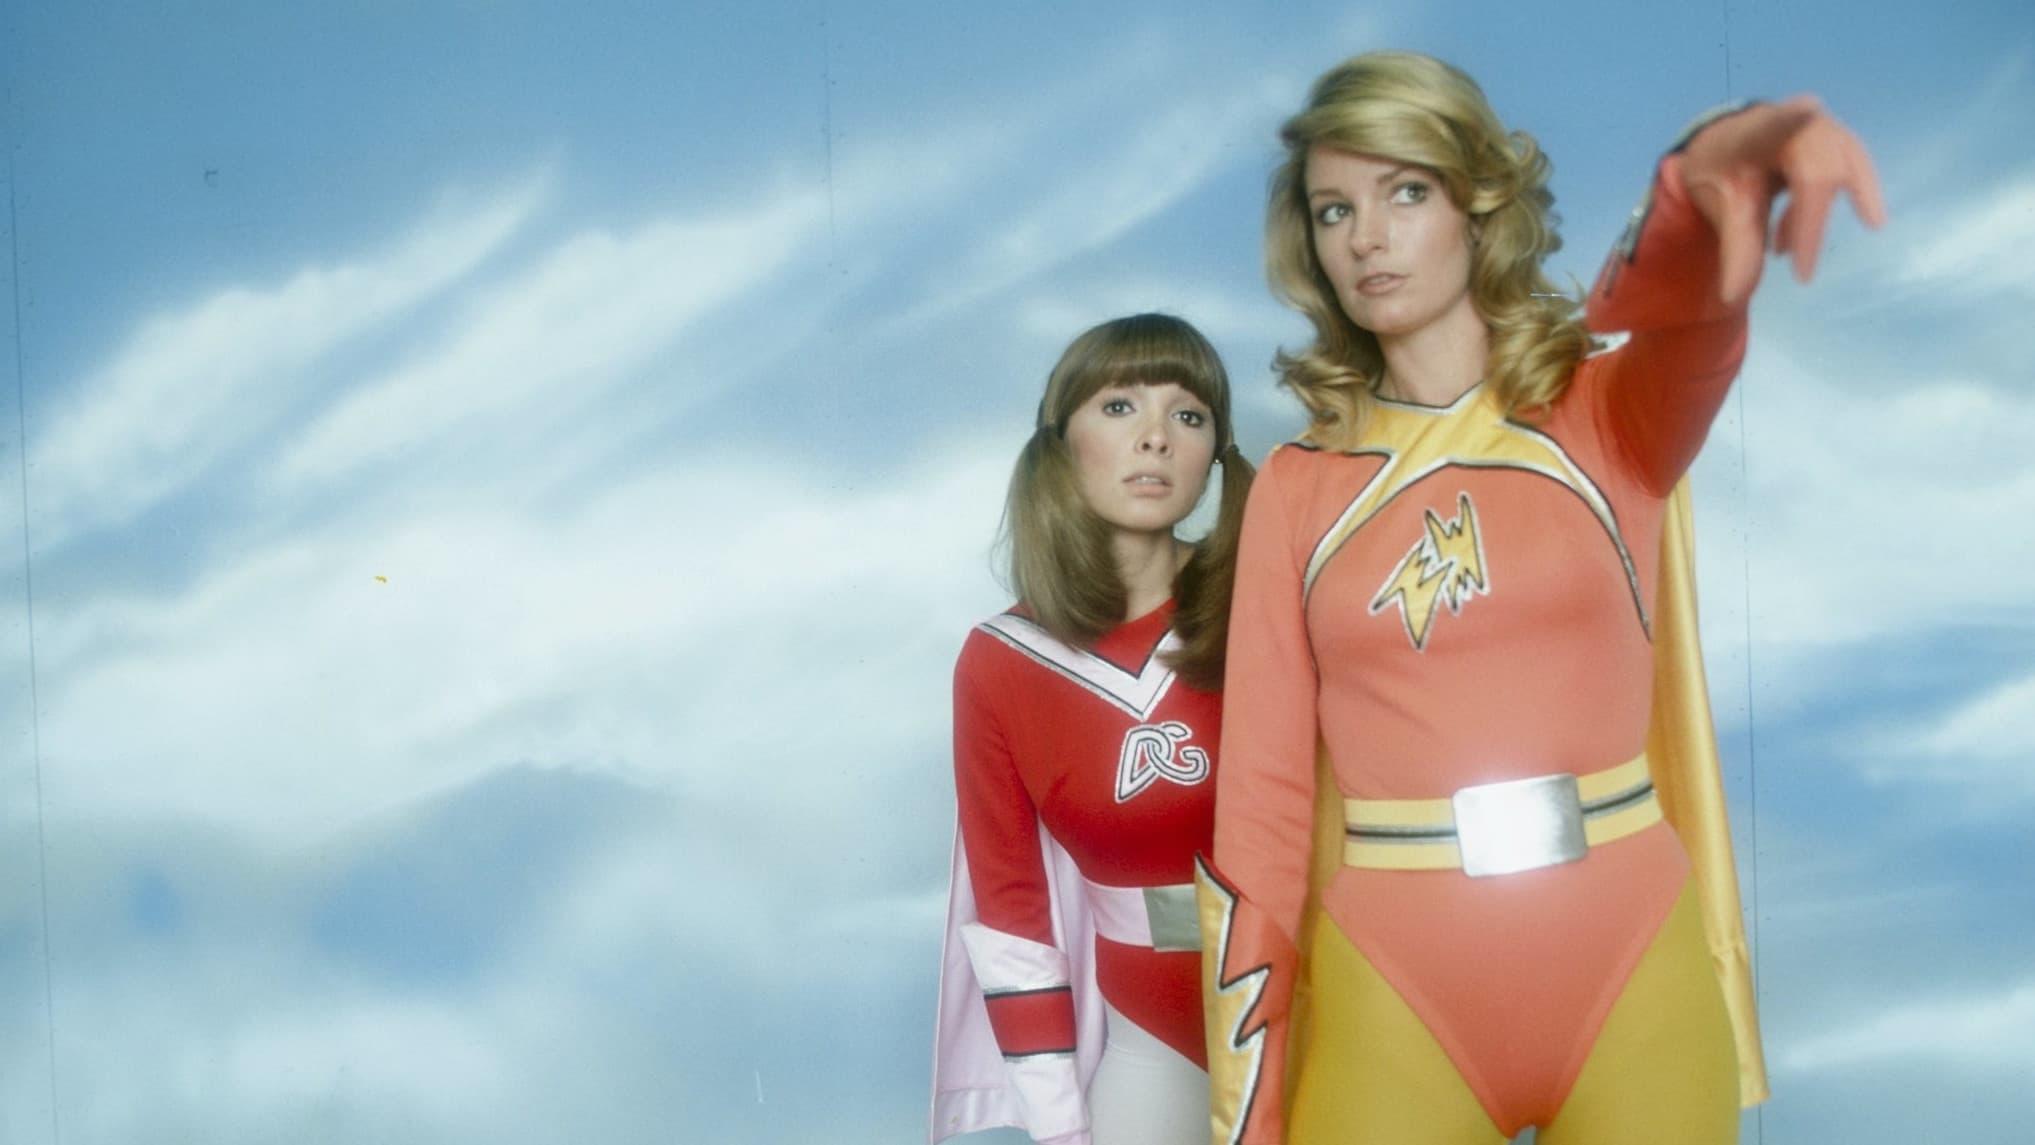 Electra Woman and Dyna Girl backdrop